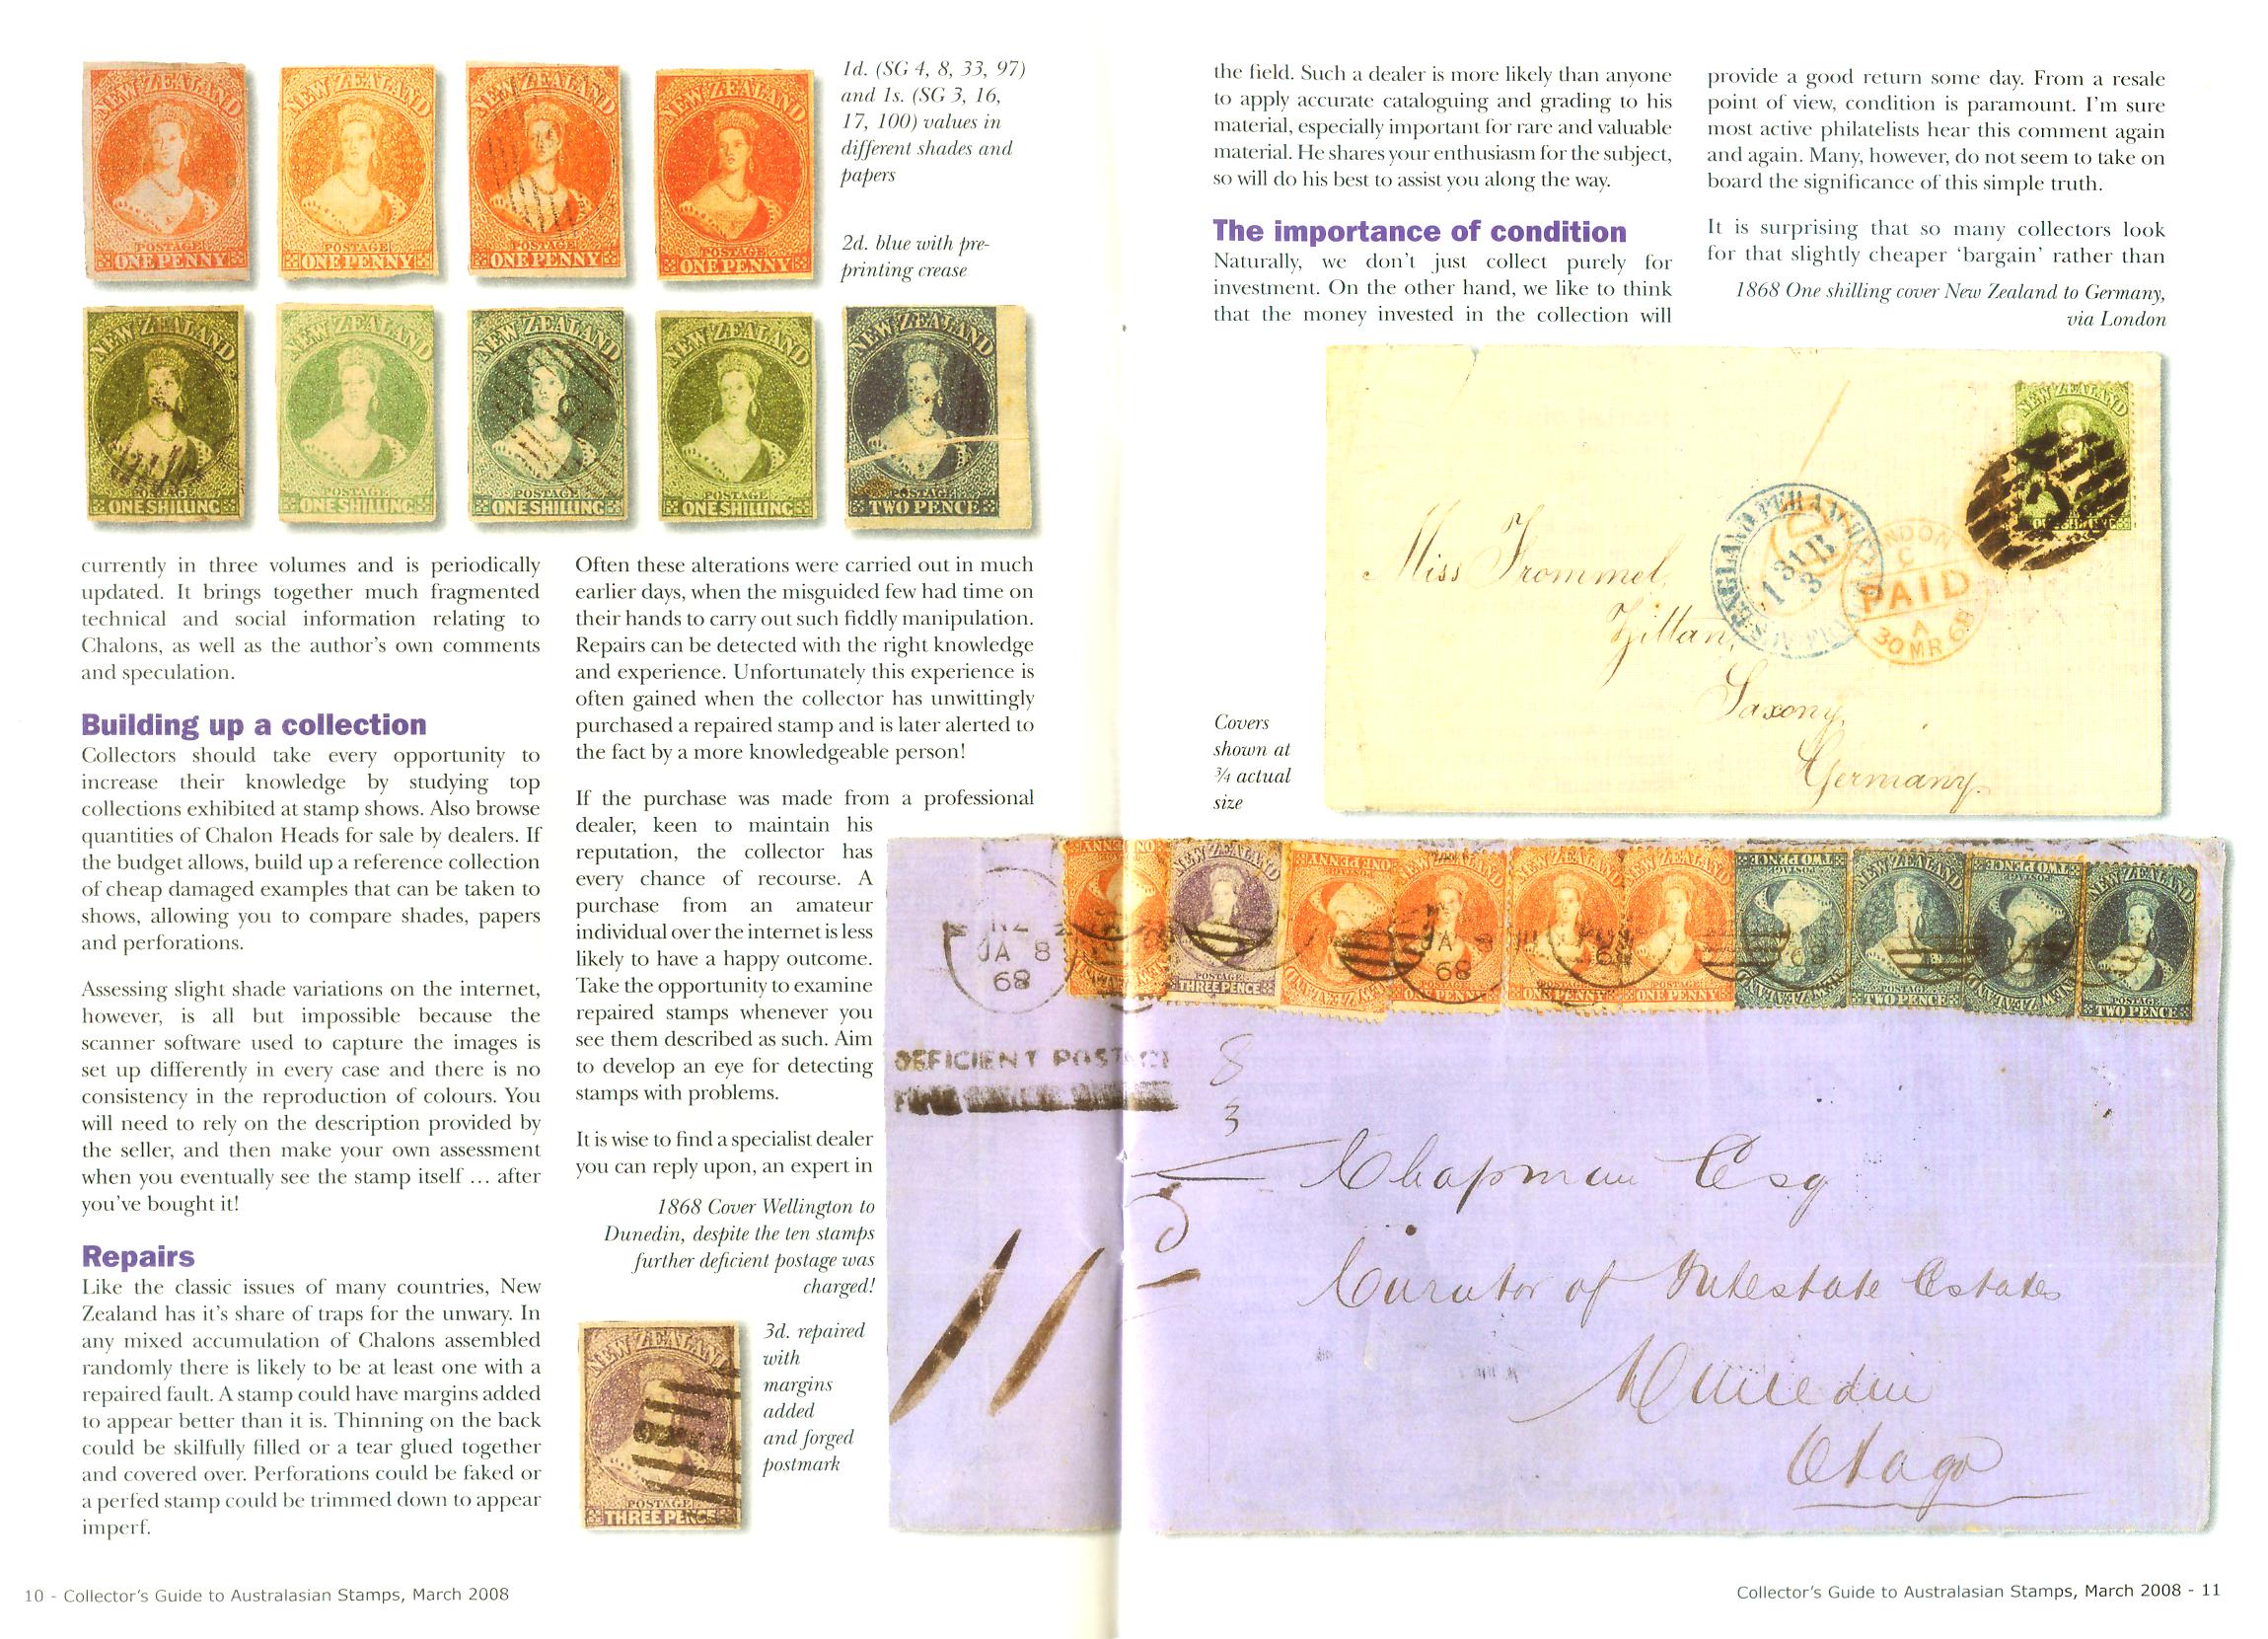 New Zealand Chalons pages 5-6